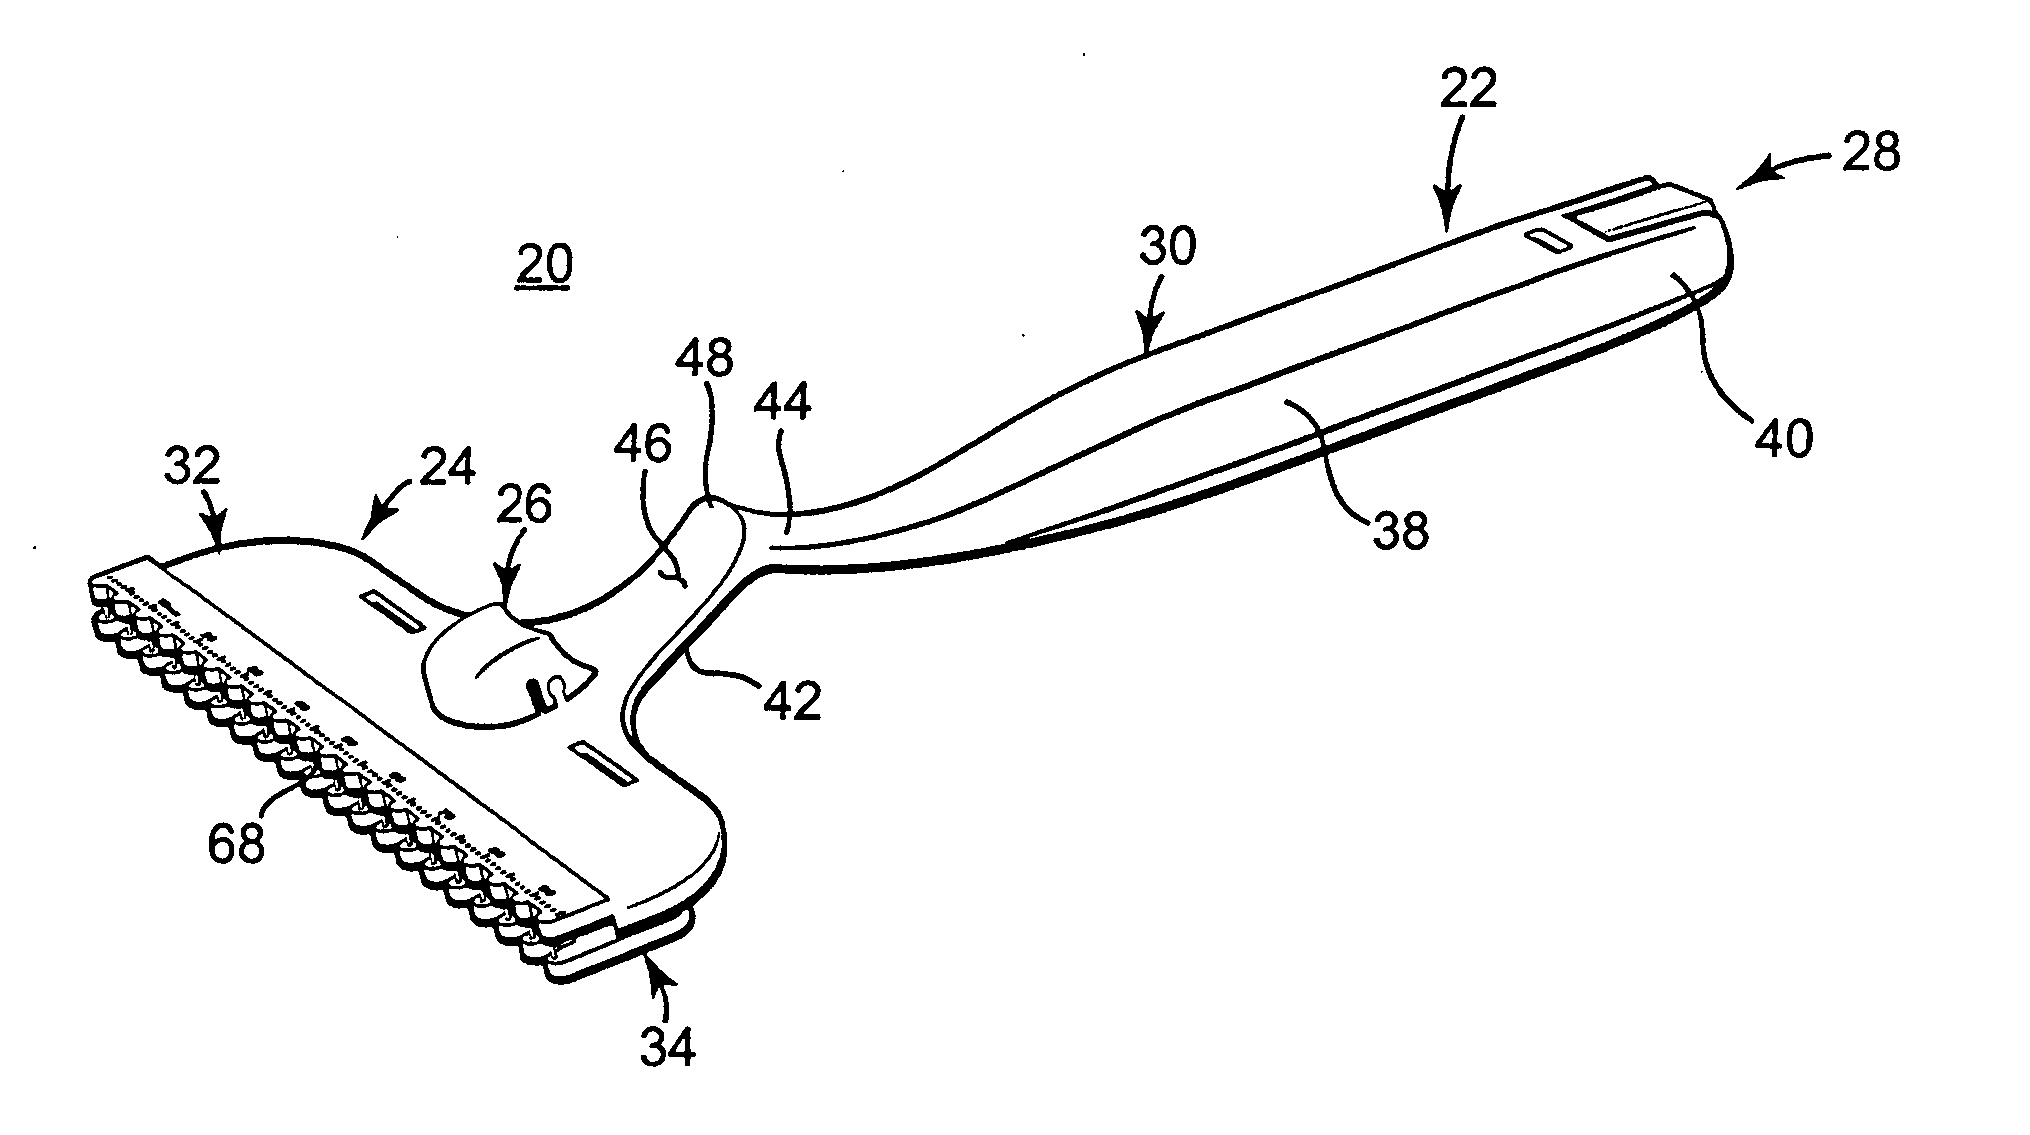 Tool and method for implanting an annuloplasty prosthesis